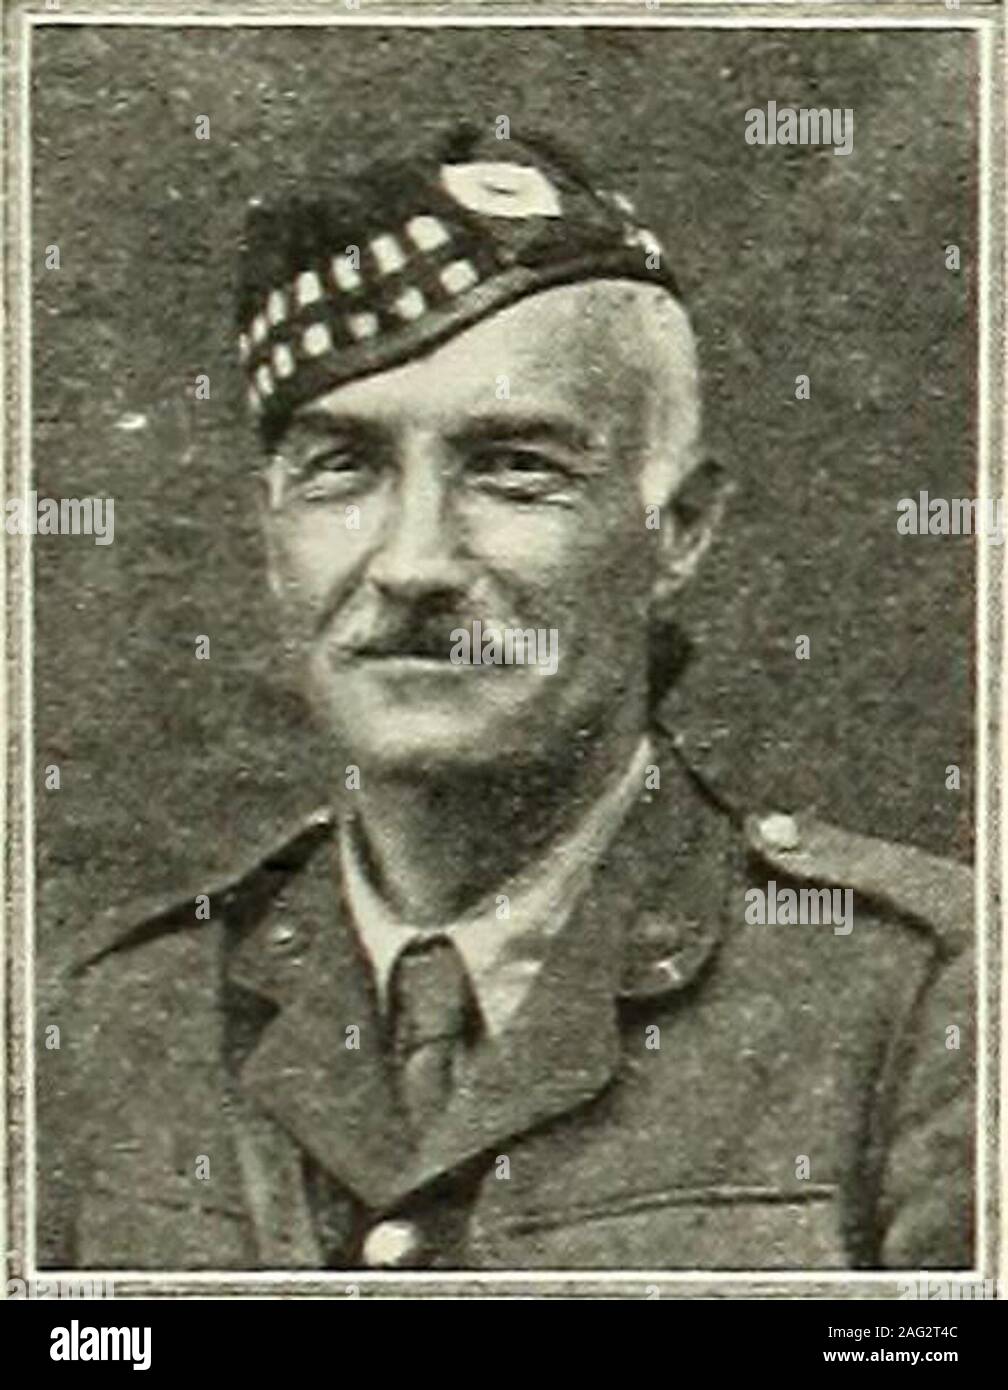 . Roll of service in the Great War, 1914-1919. IN MEMORIAM.. KEMP, JAMES OGILVIE : Captain (Act-ing Lieutenant-Colonel), 5th BattalionRoyal Scots ; son of John Kemp, wine mer-chant and lime manu-facturer ; born Keith,15 August 1865 ; edu-cated at Keith and theGrammar School,Aberdeen; graduatedM.A., 1886; admittedto the Faculty of Advo-cates, Edinburgh,1889, where he held agood practice until heleft for service shortlyafter the outbreak of war. Under Lord Advo-cate Murray, Kemp held the posts of SheriffCourt Depute and Extra Advocate Depute ; andin 1899 and 1900 was interim sheriff substituteat Stock Photo